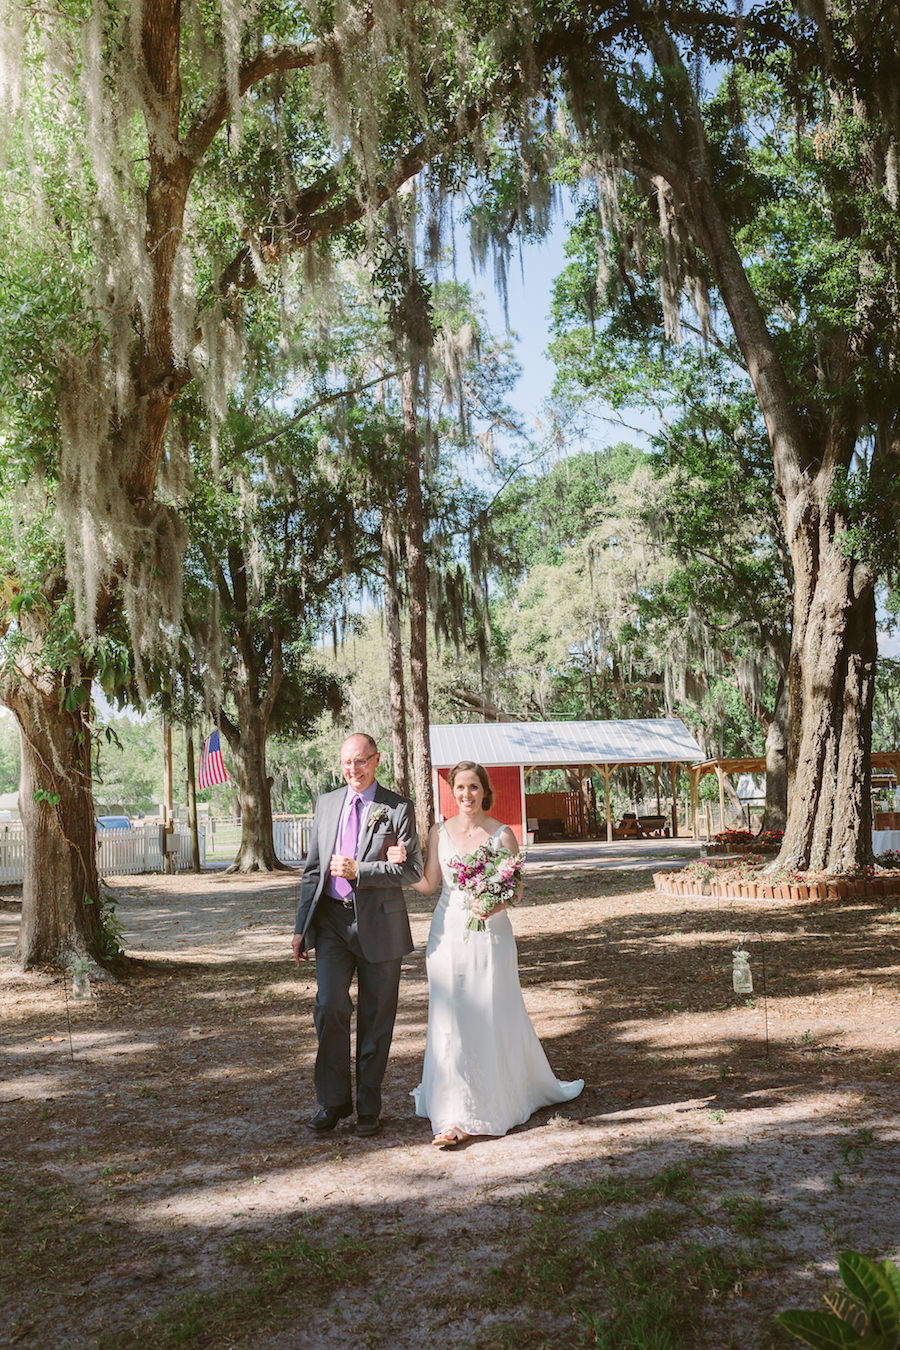 Outdoor, Rustic, Country Wedding Ceremony, Bride and Dad Walking Down the Aisle | Tampa Bay Wedding Venue Old McMicky's Farm The Barn at Crescent Lake